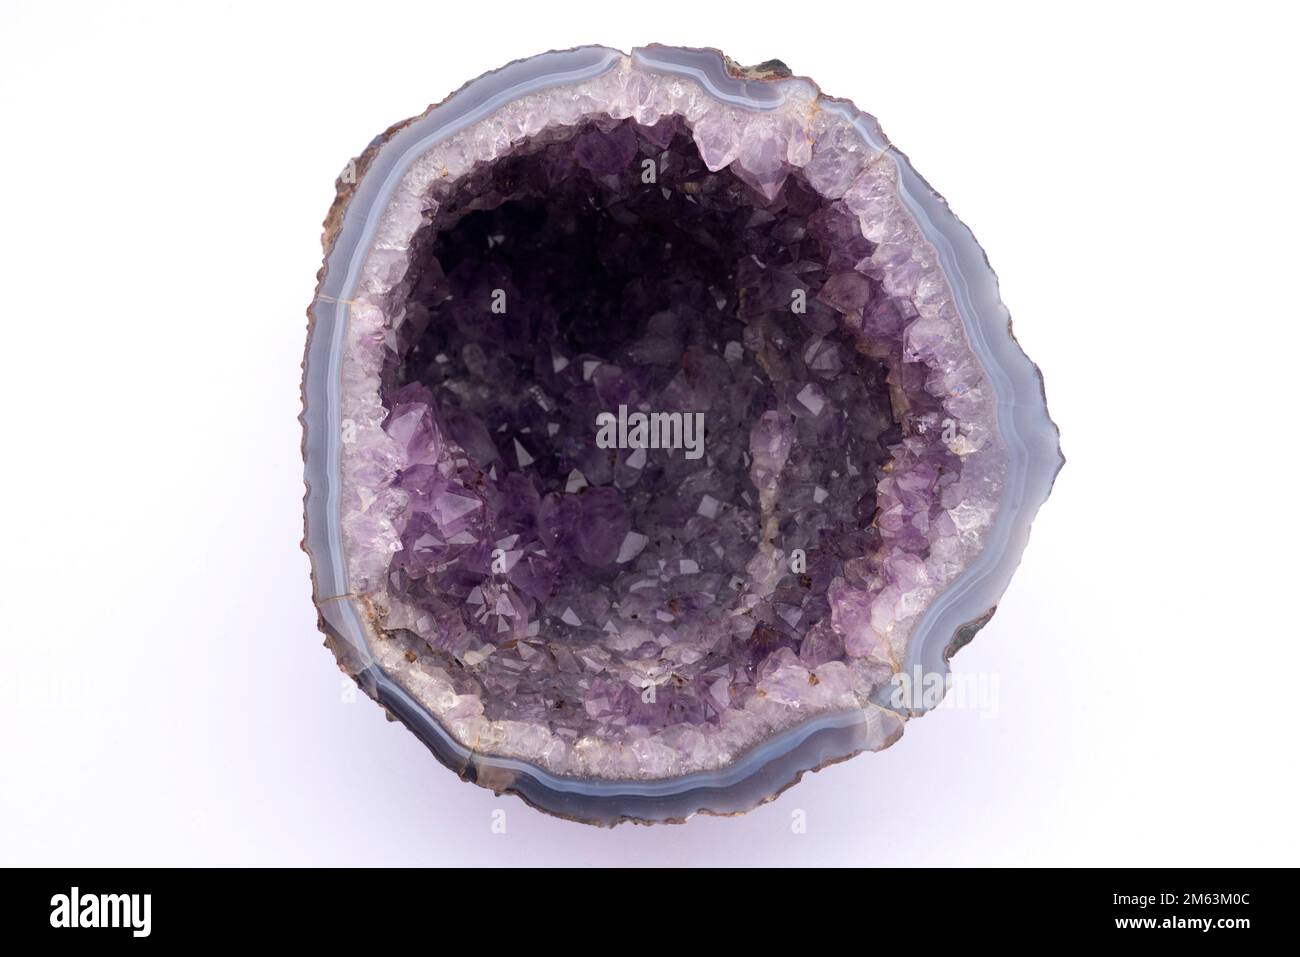 Geode of amethyst. Amethyst is a variety of quartz, semiprecious stone. This sample comes from Brazil. Stock Photo